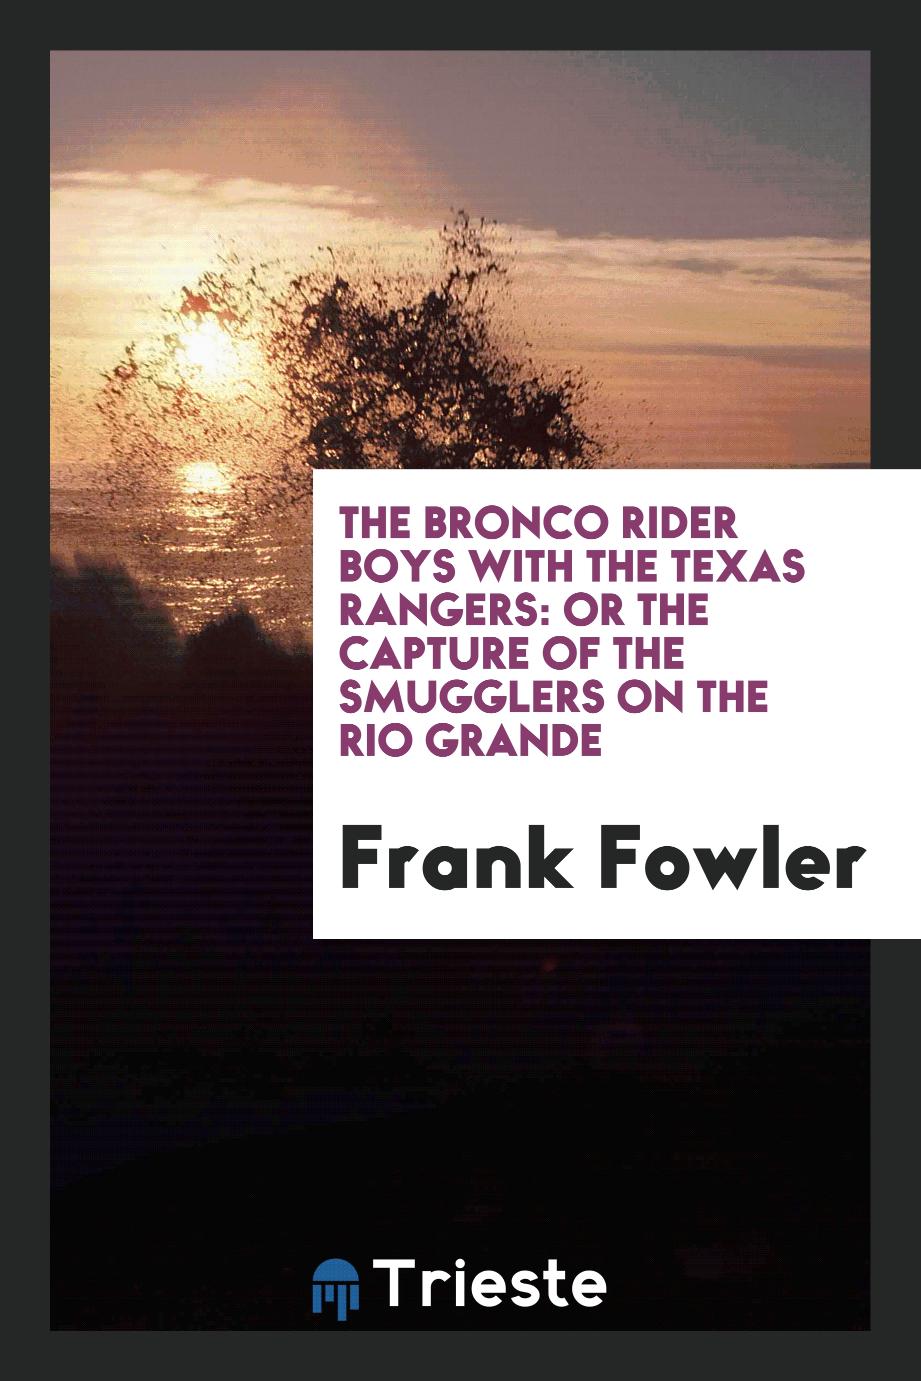 The bronco rider boys with the Texas Rangers: or the capture of the smugglers on the Rio Grande